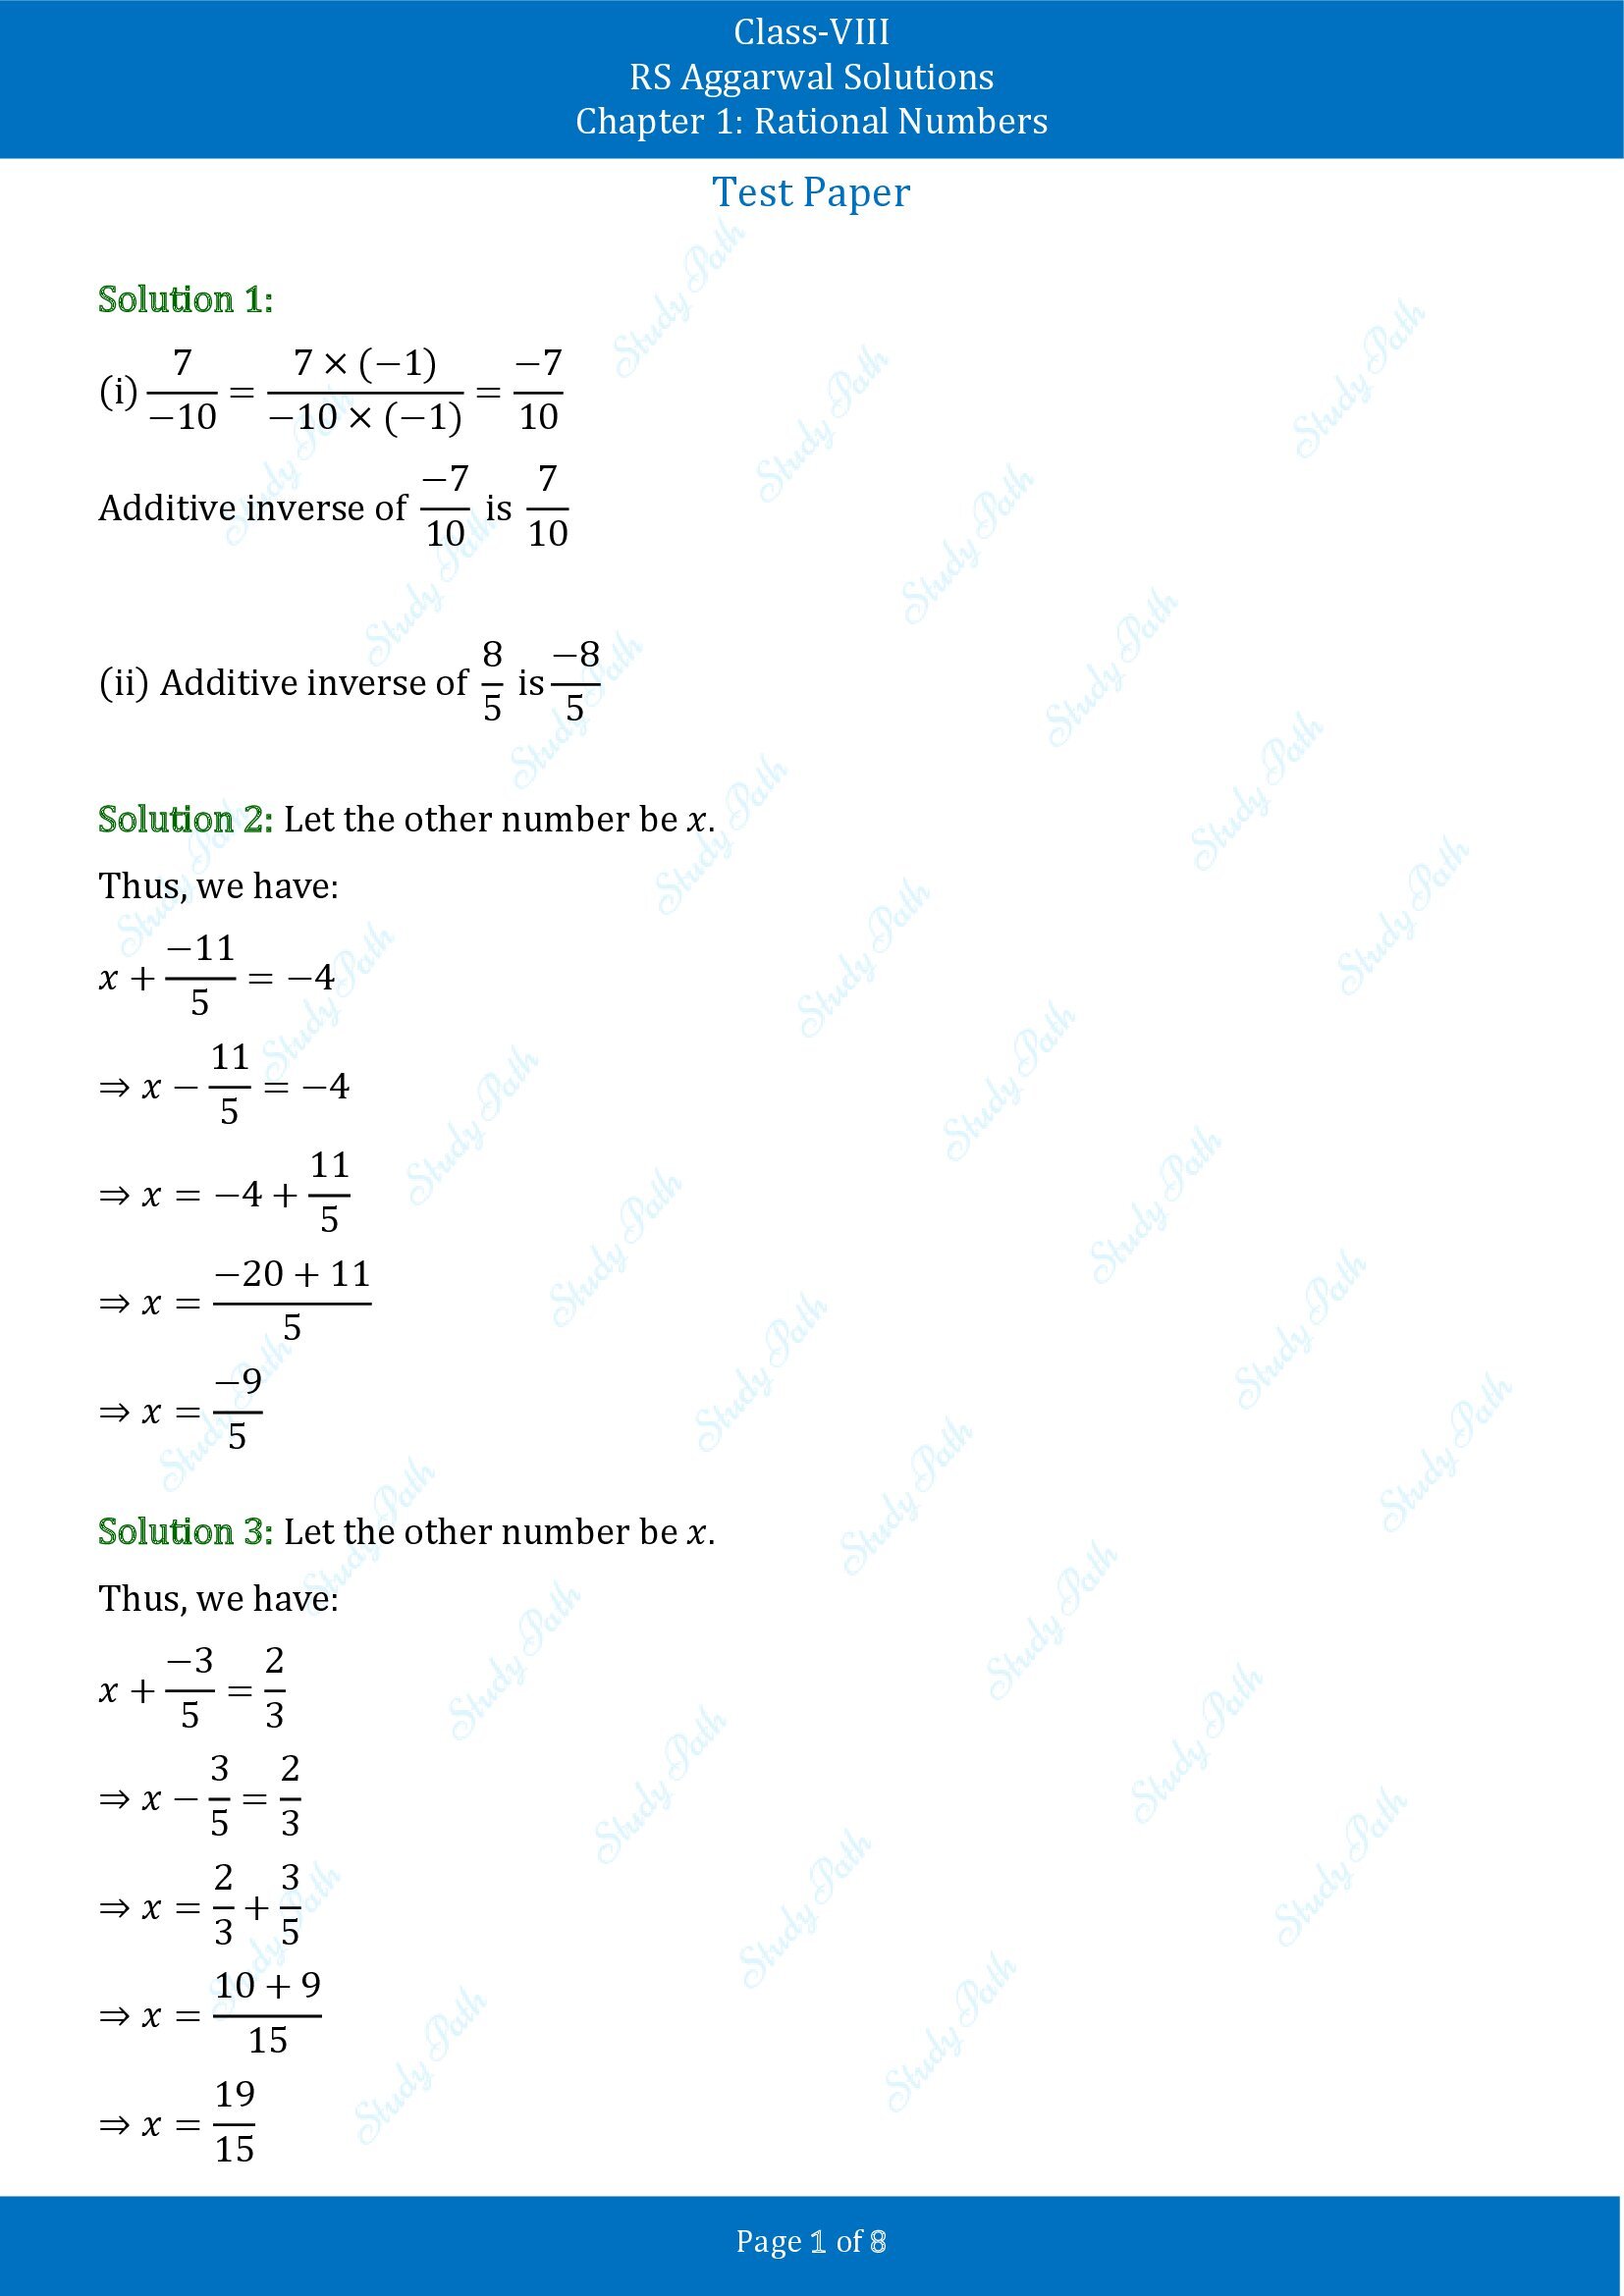 RS Aggarwal Solutions Class 8 Chapter 1 Rational Numbers Test Paper 00001